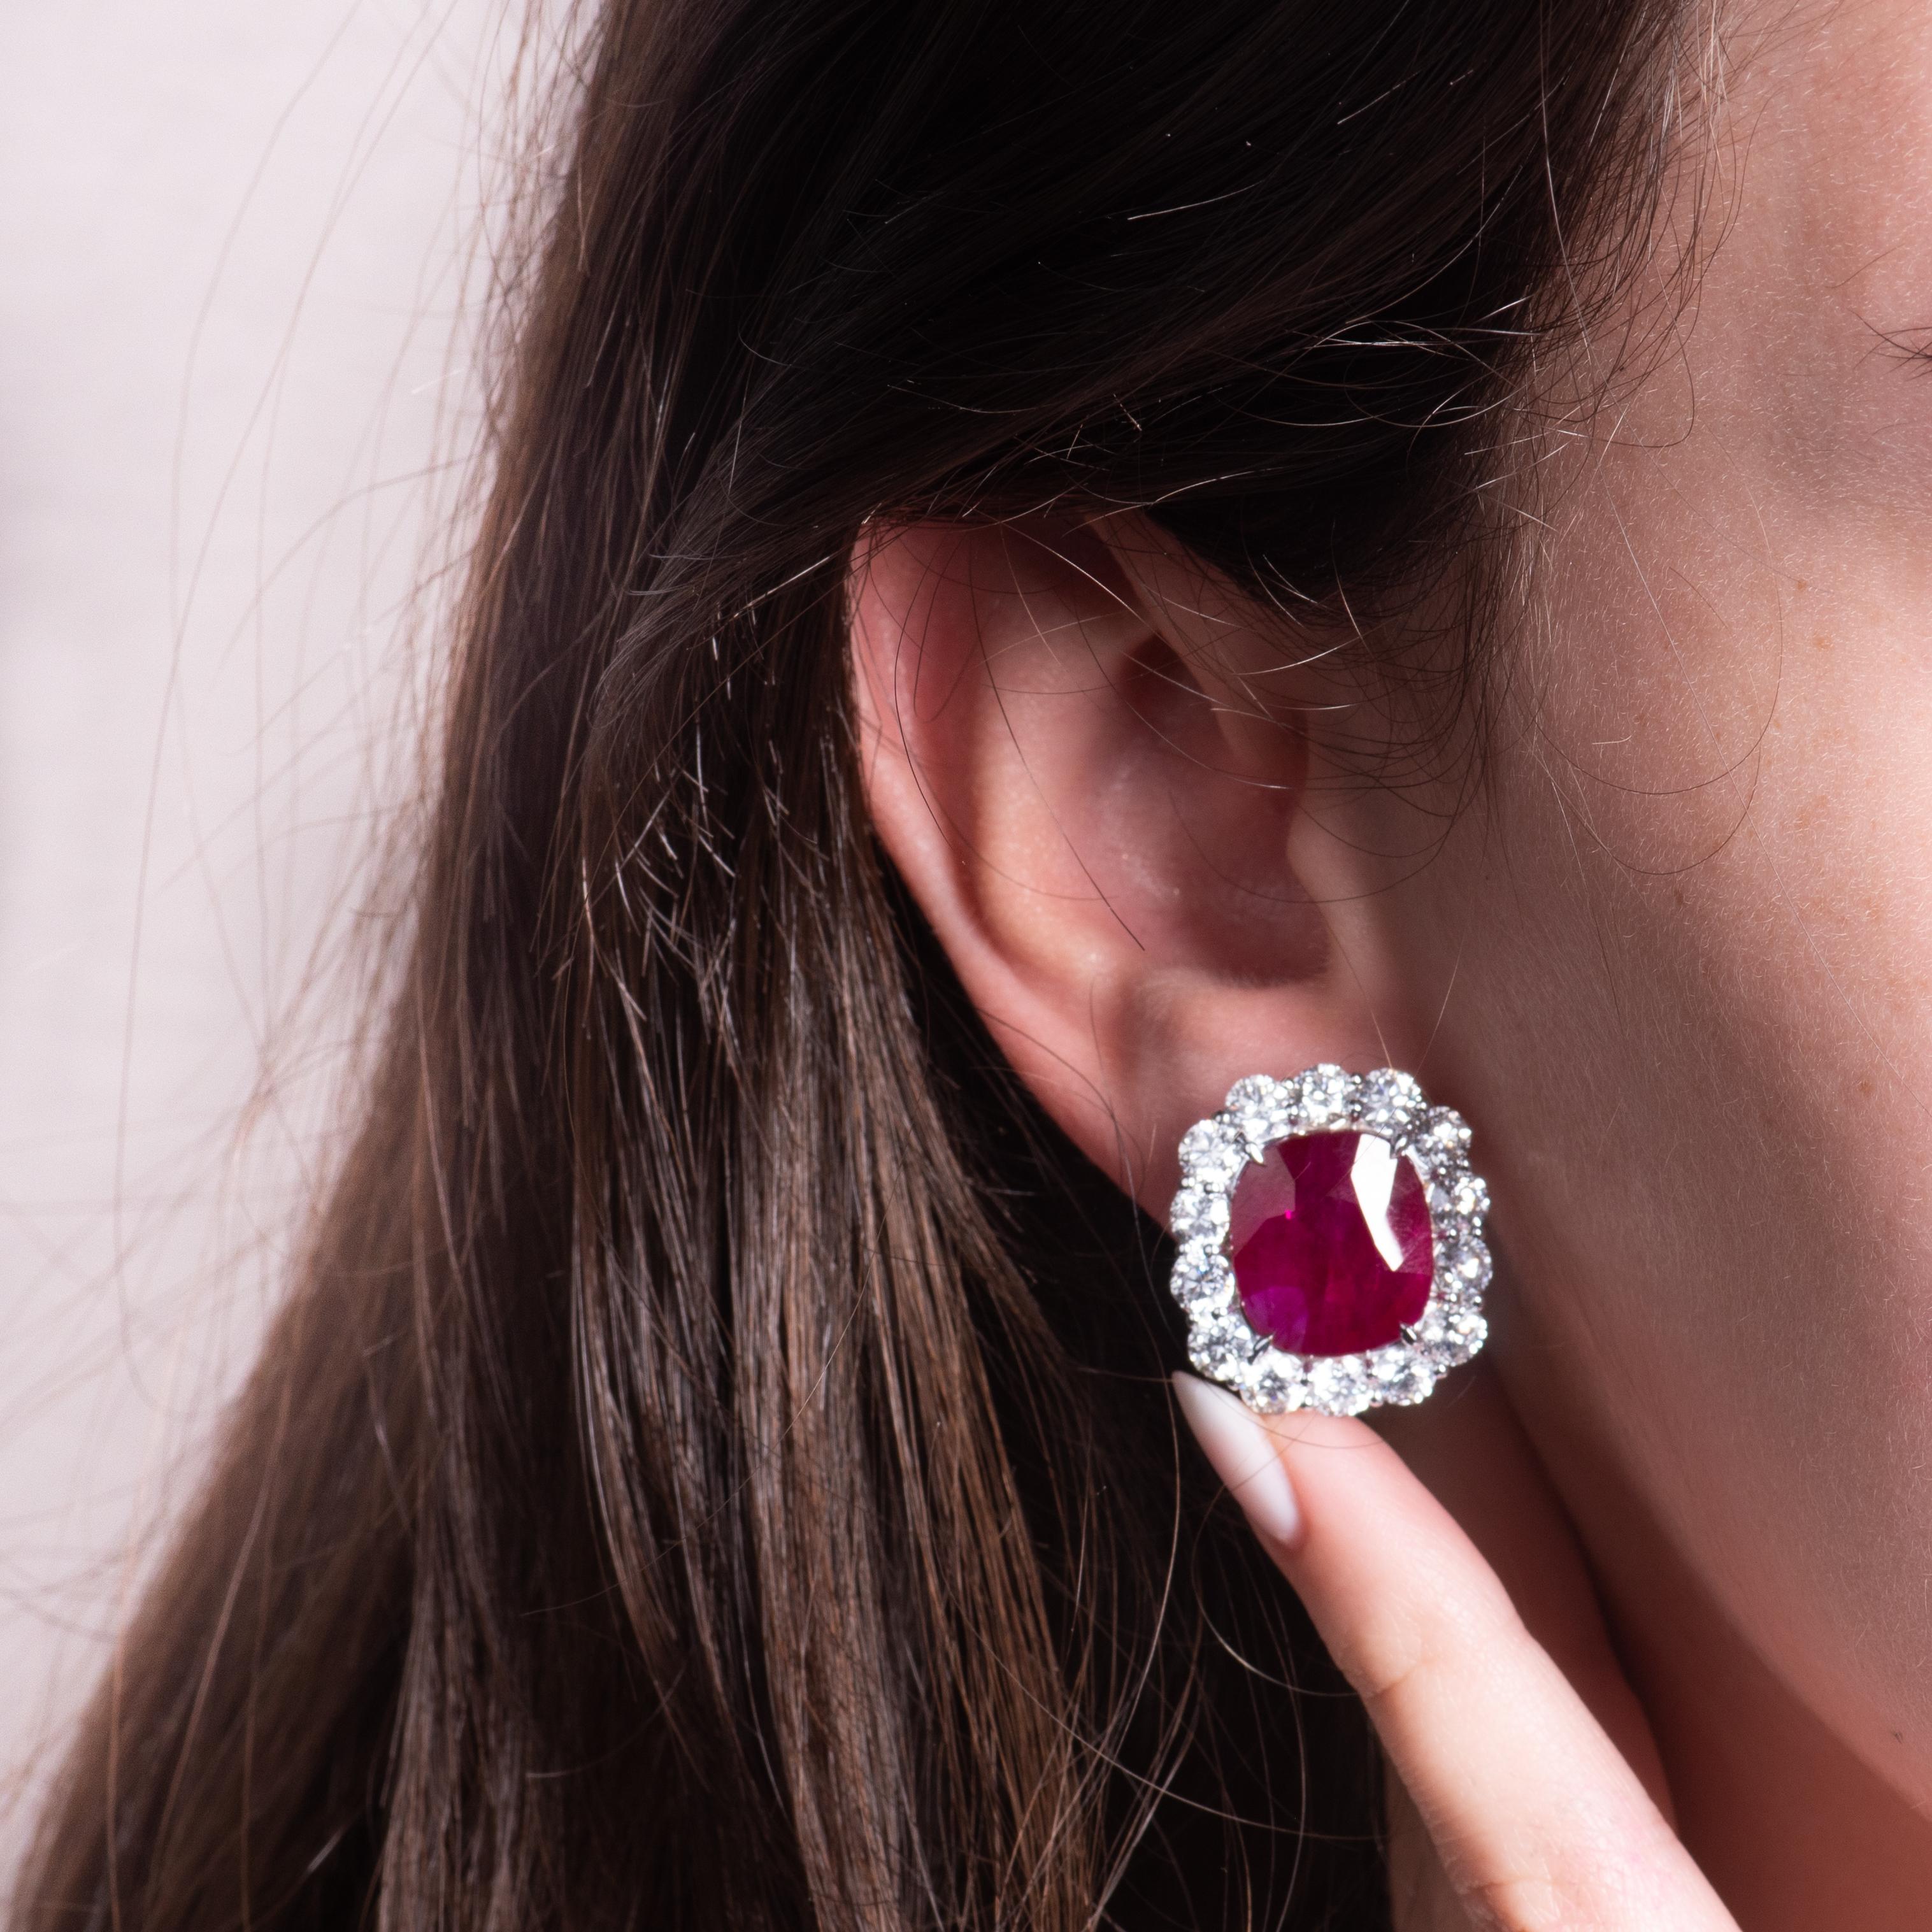 These incredible 14.73ct total weight cushion shape/mixed cut Mozambique rubies are an intense red color, surrounded by 6.93ct total weight in colorless round diamonds forming their halos. These precious gems are set in an 18kt white gold earrings,